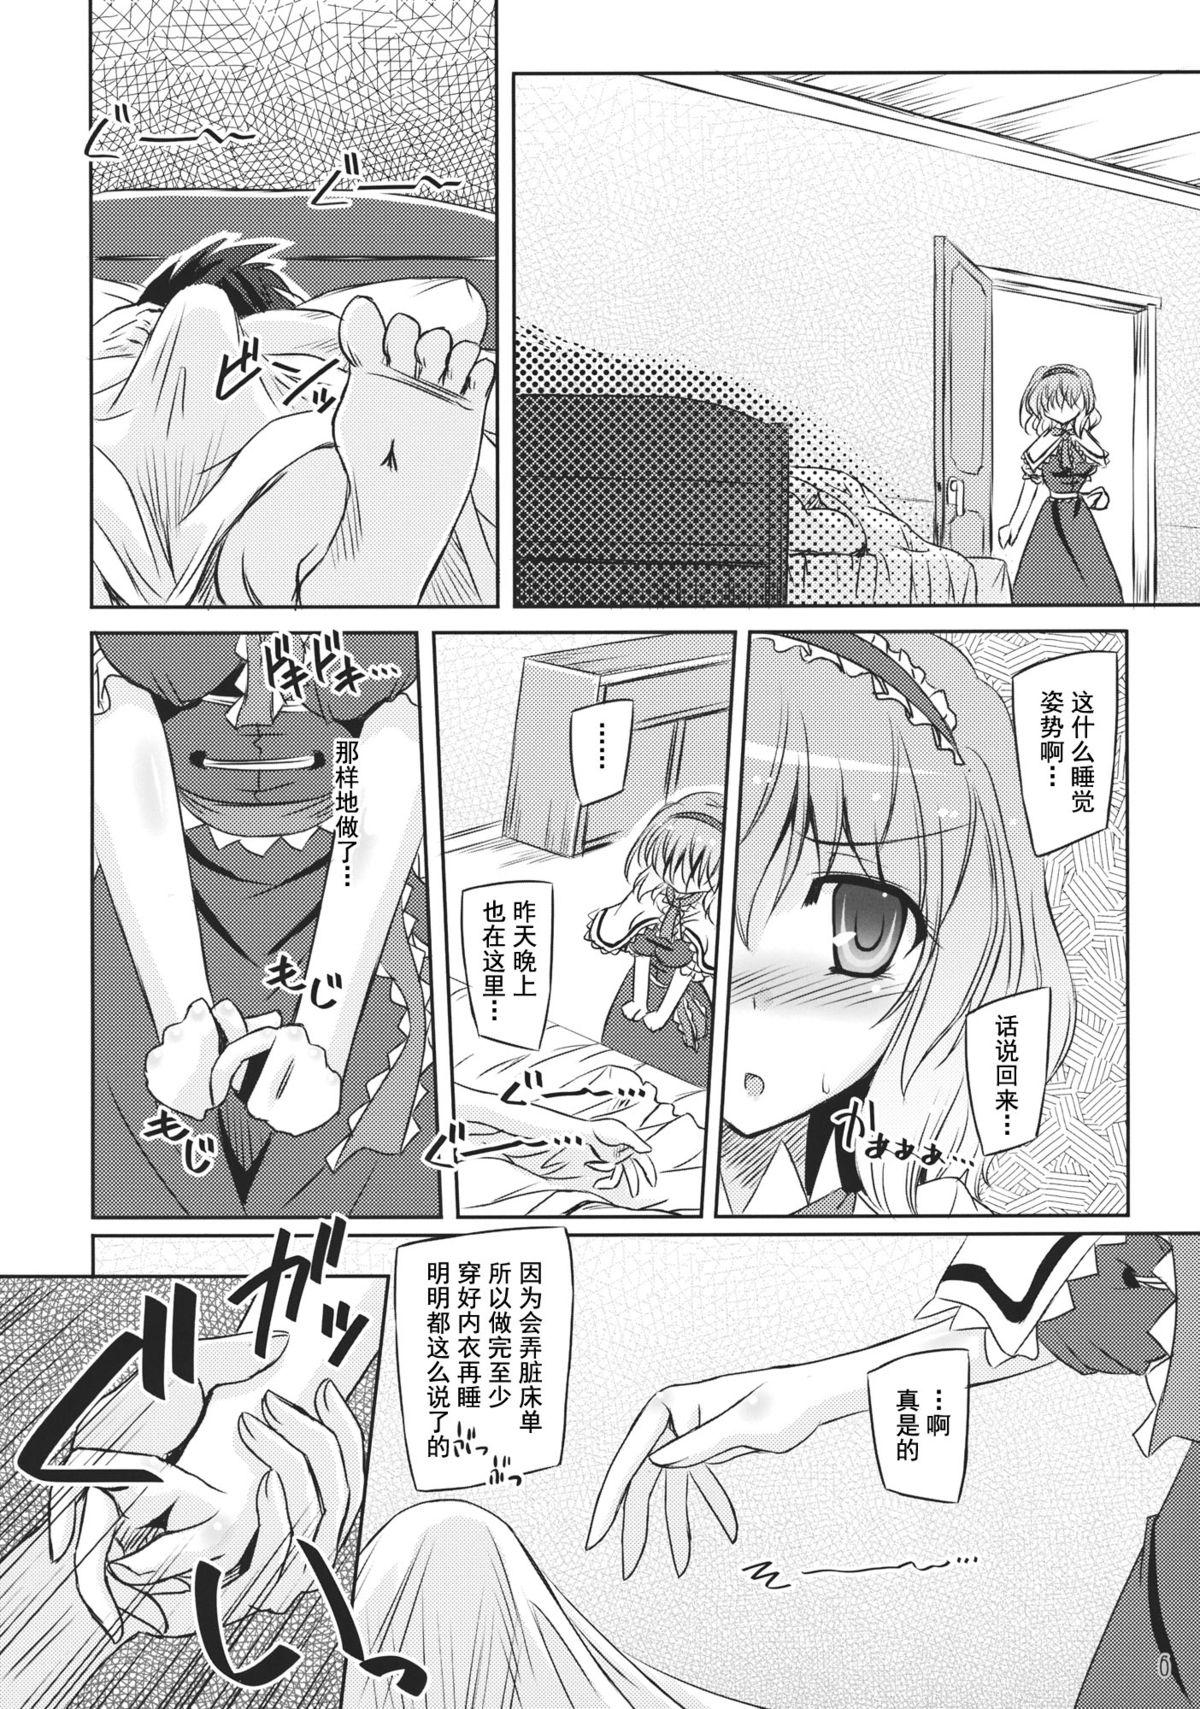 Pussyfucking Loose Strings - Touhou project Maledom - Page 6